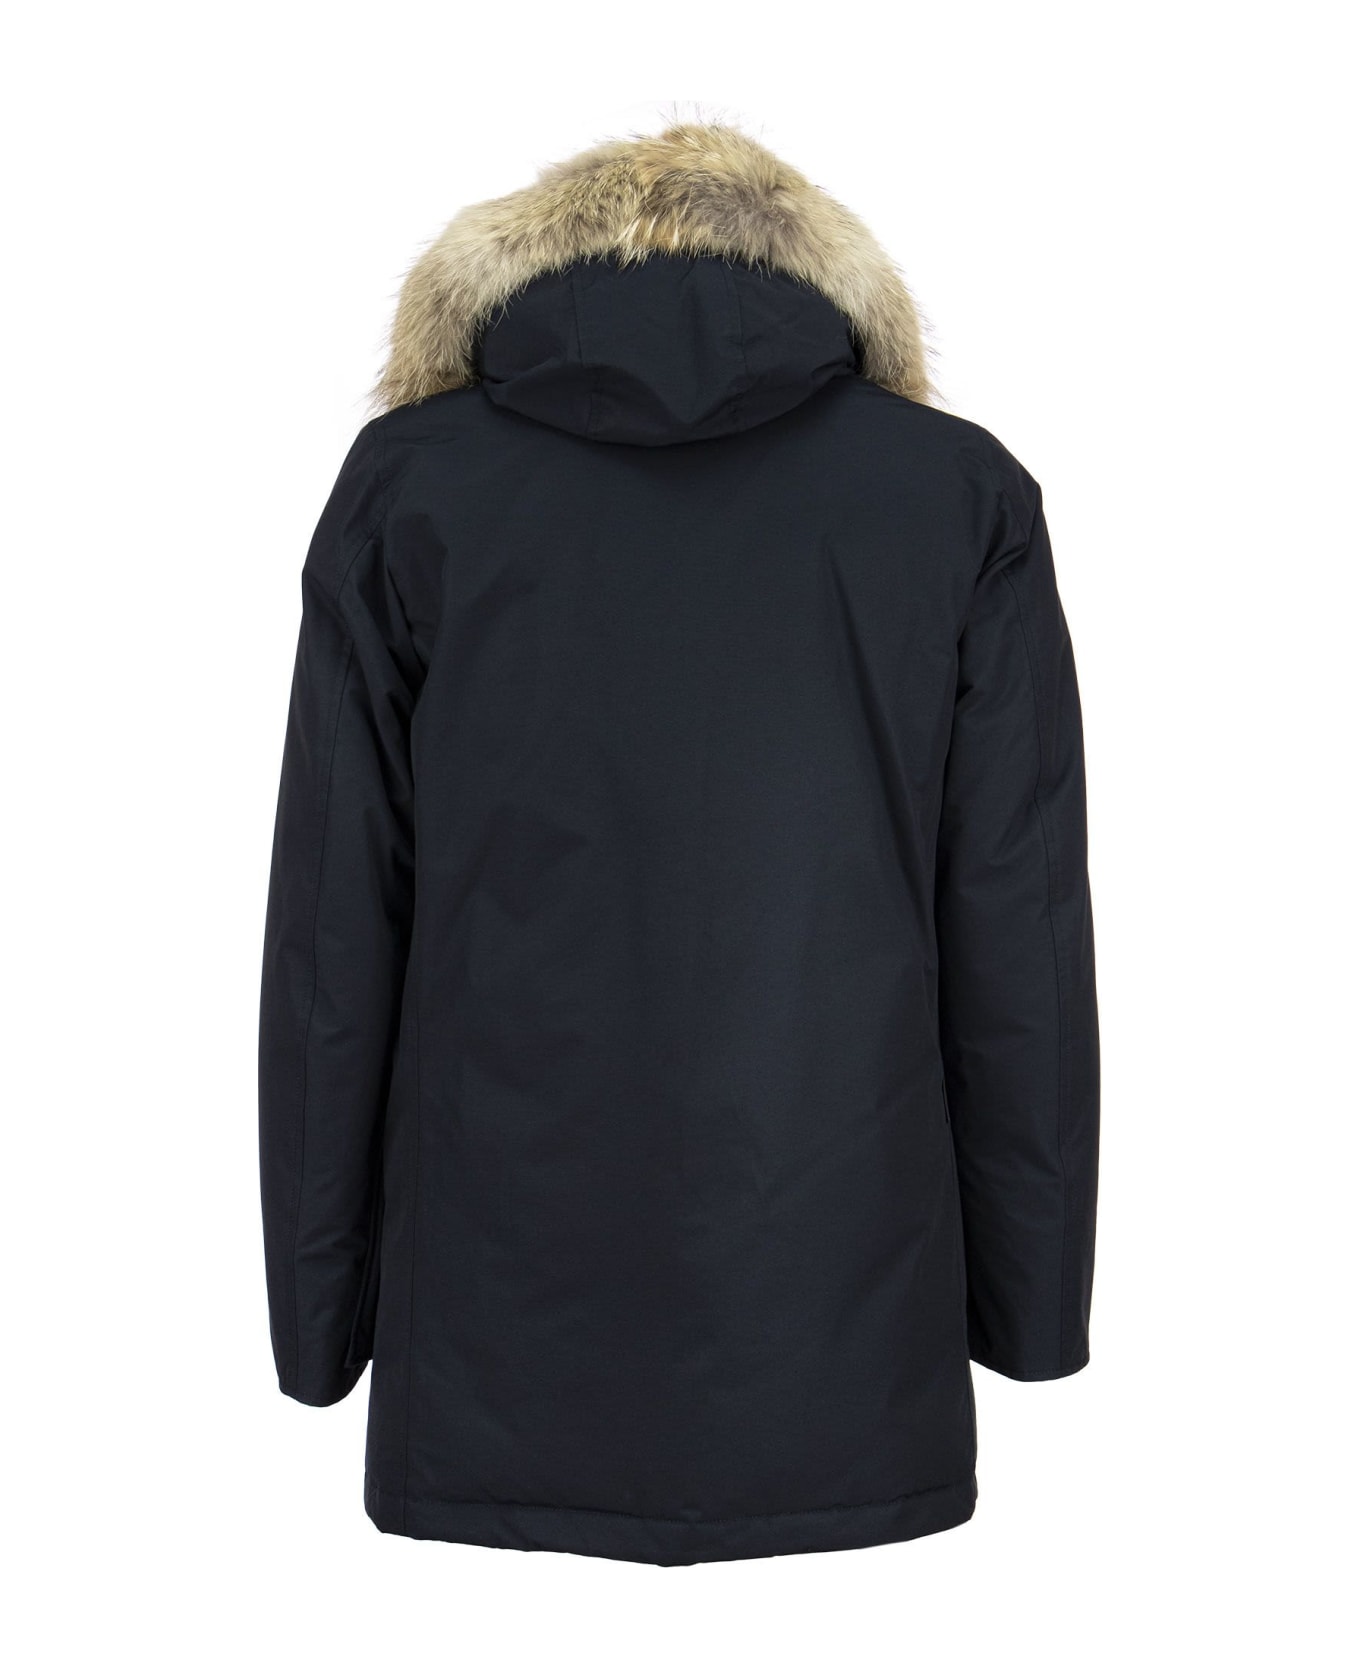 Woolrich Artic Df Parka With Coyote Fur Woolrich - Blue ダウンジャケット